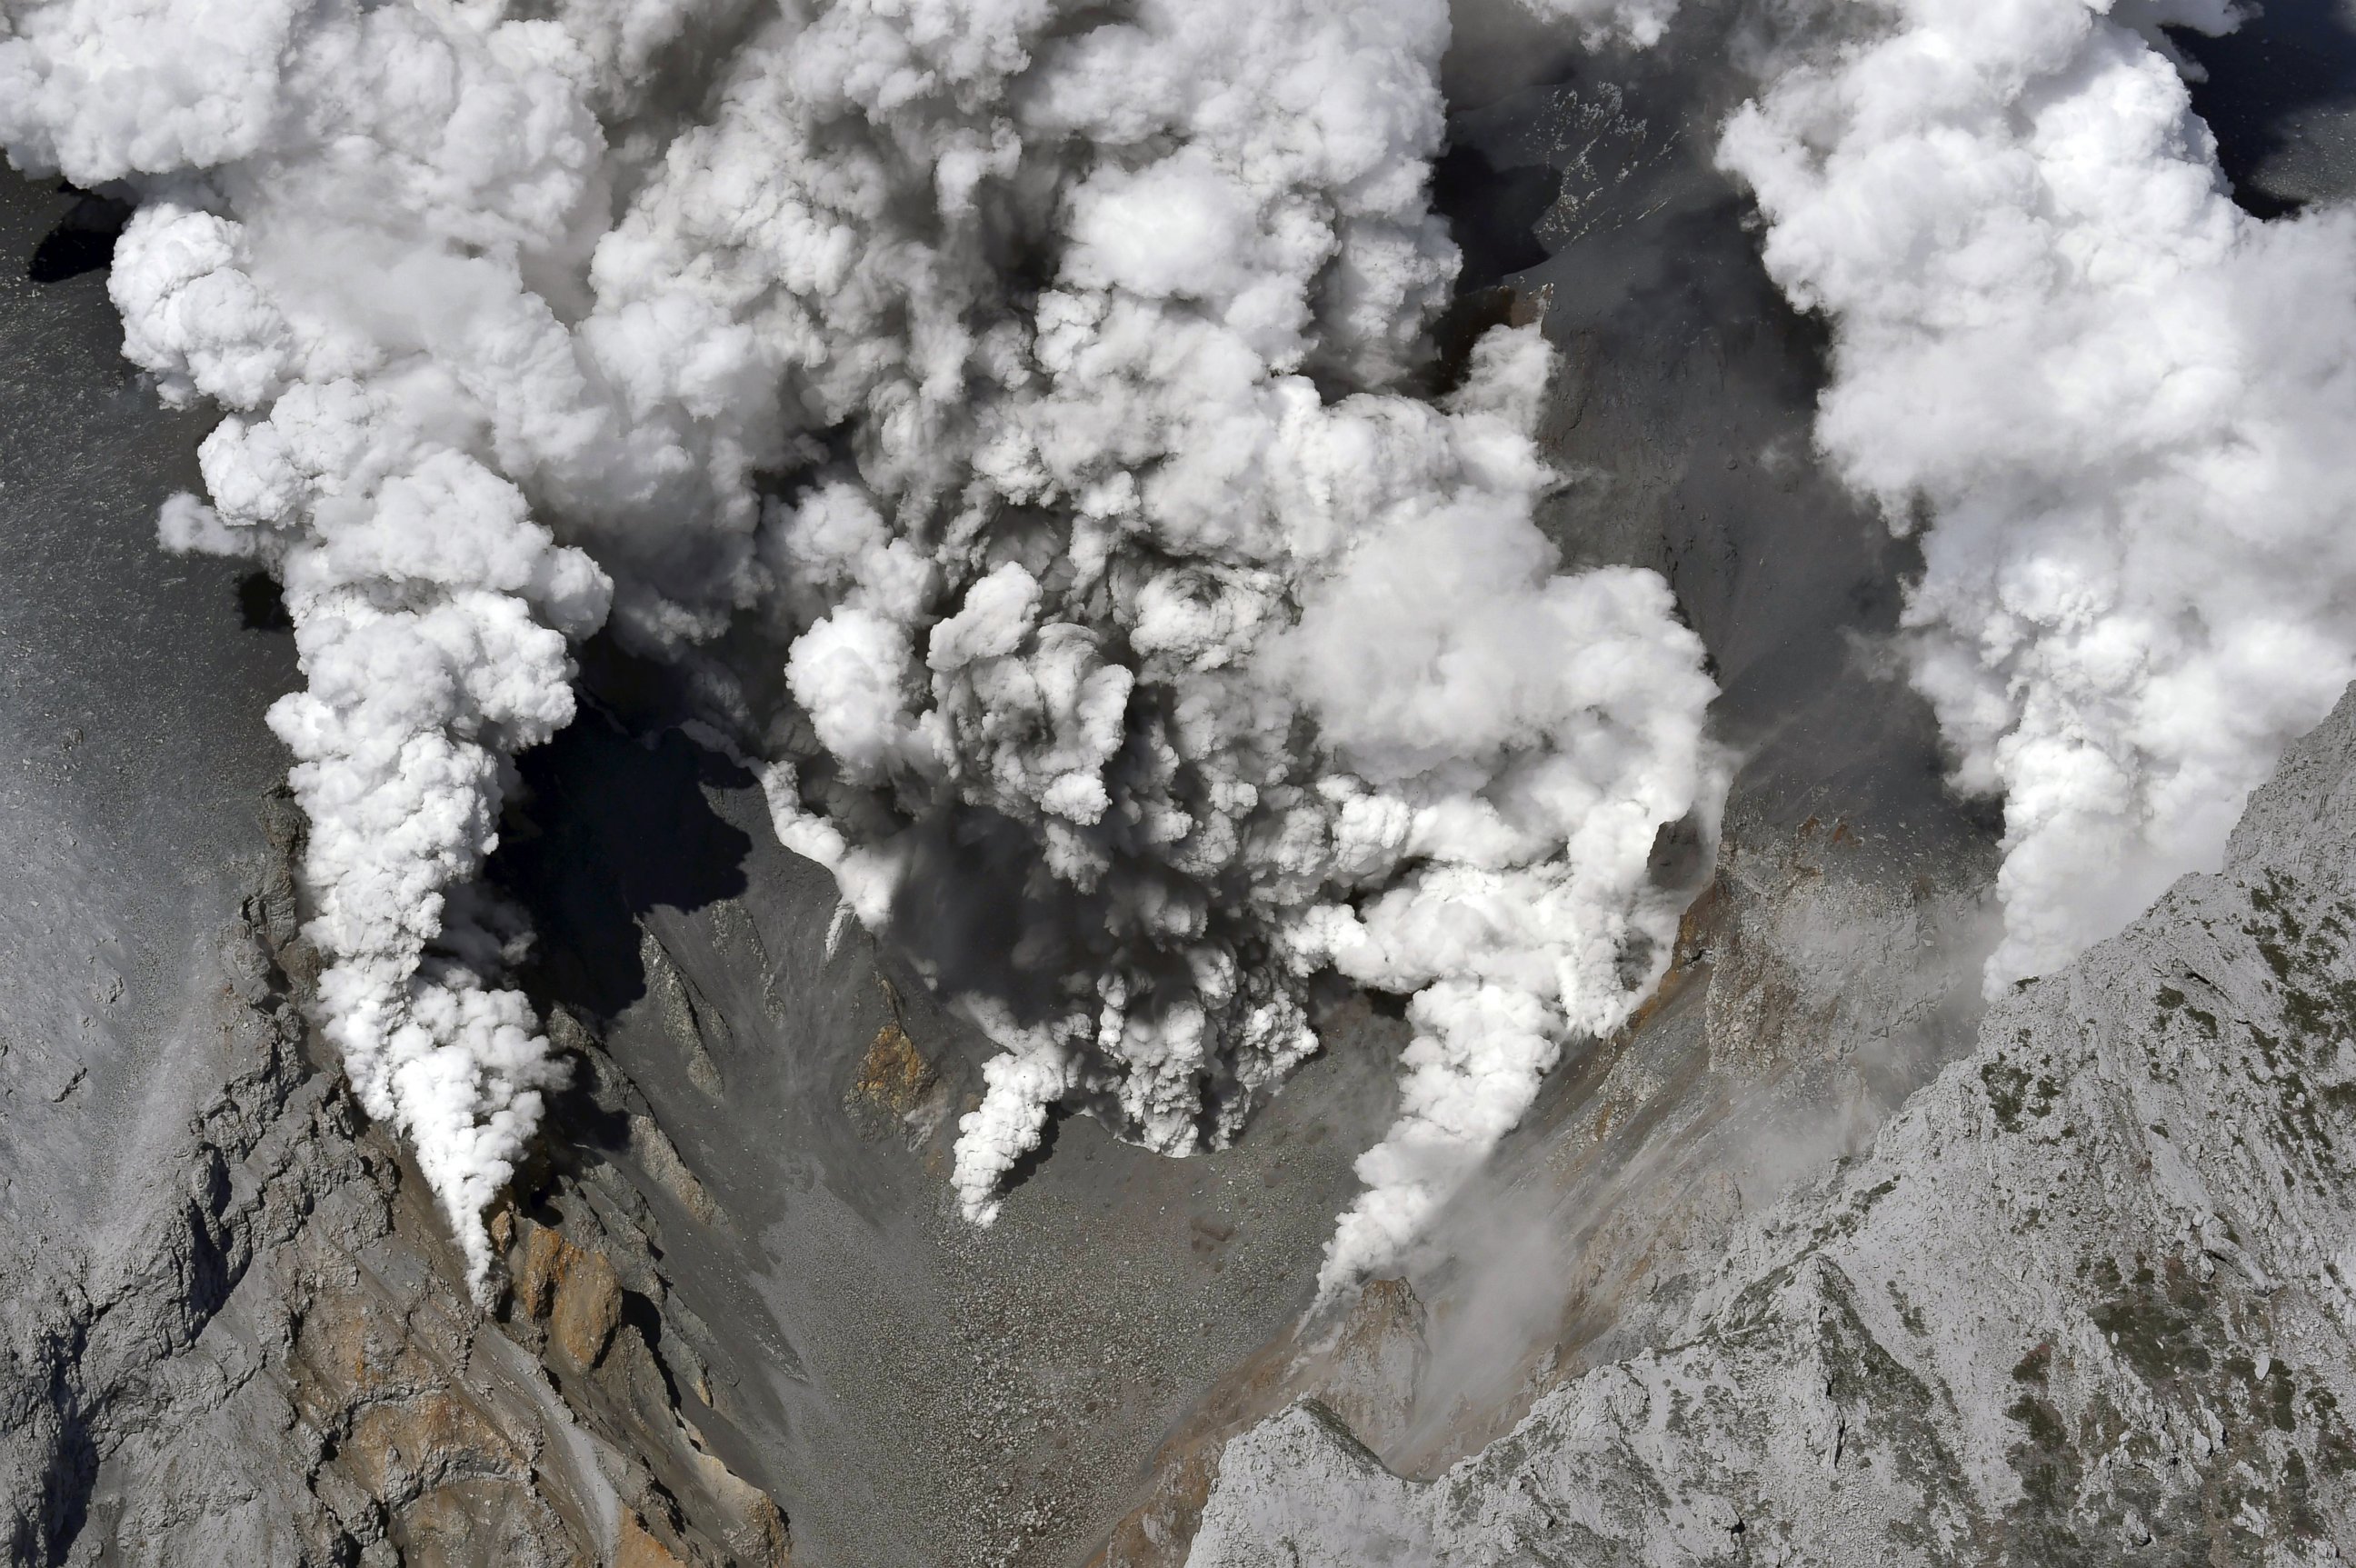 PHOTO: Dense fumes are spewed out from several spots on the slope of Mt. Ontake as the volcano erupts in central Japan, Sept. 27, 2014. 